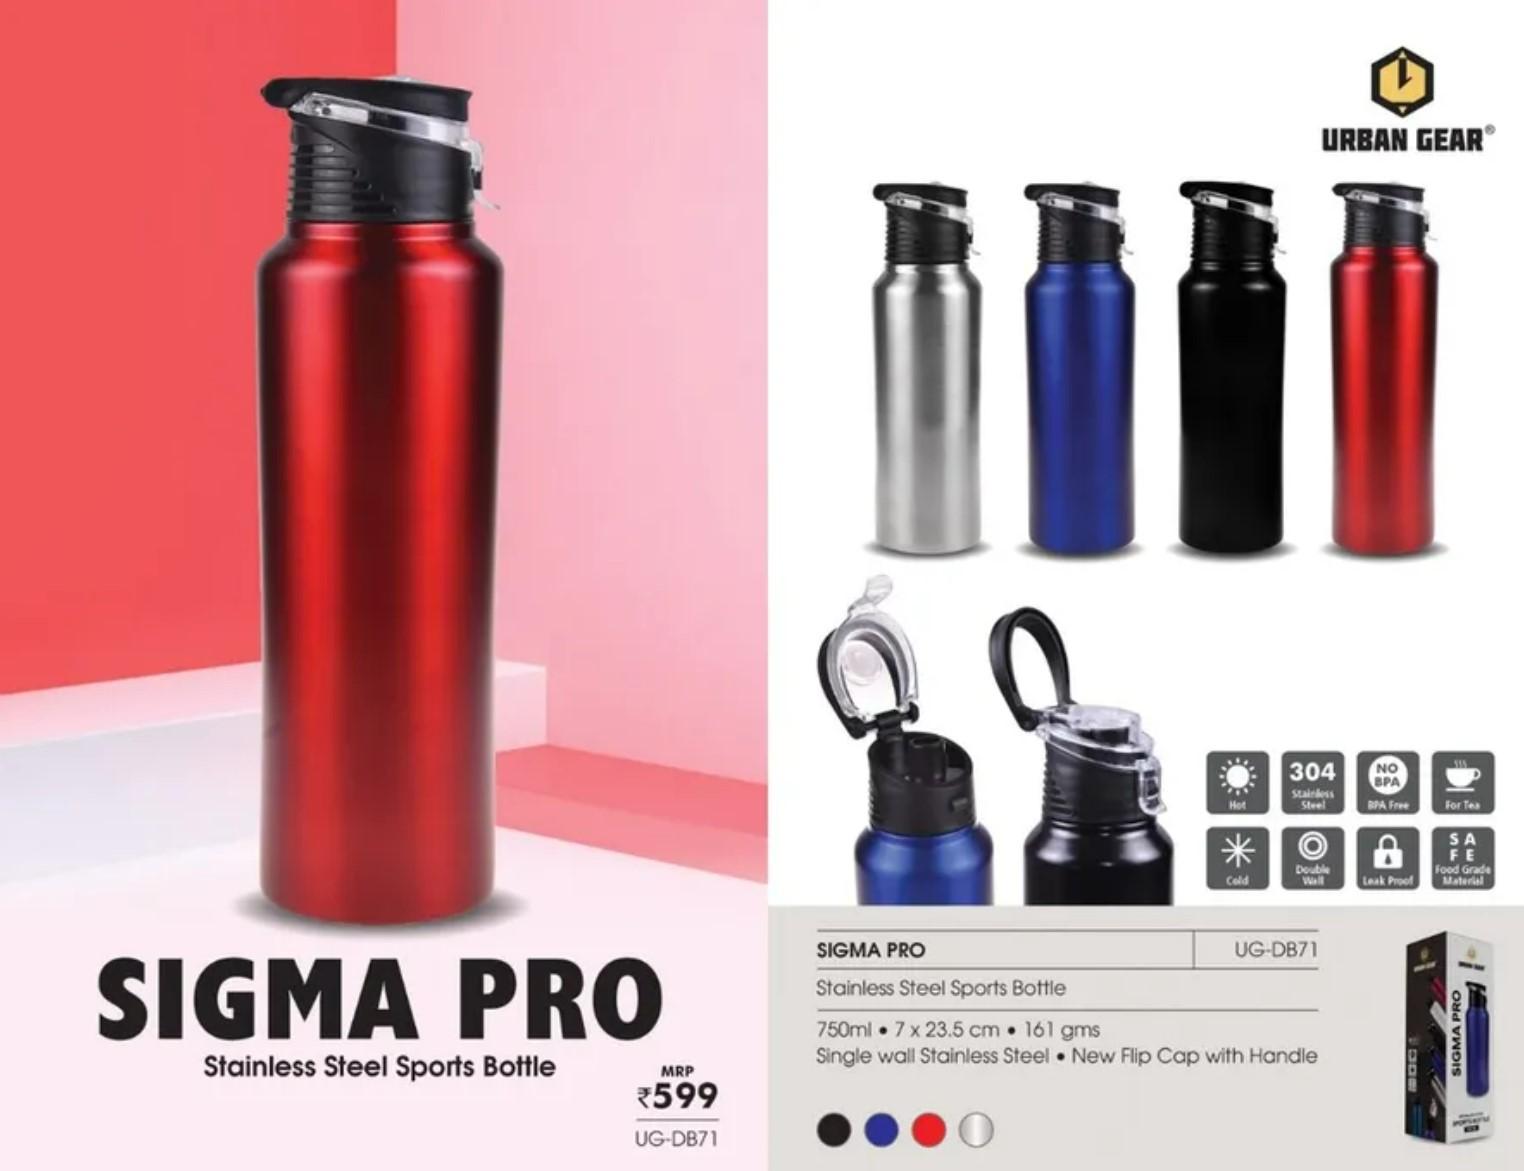 Stainless Steel Sports Bottle - SIGMA PRO